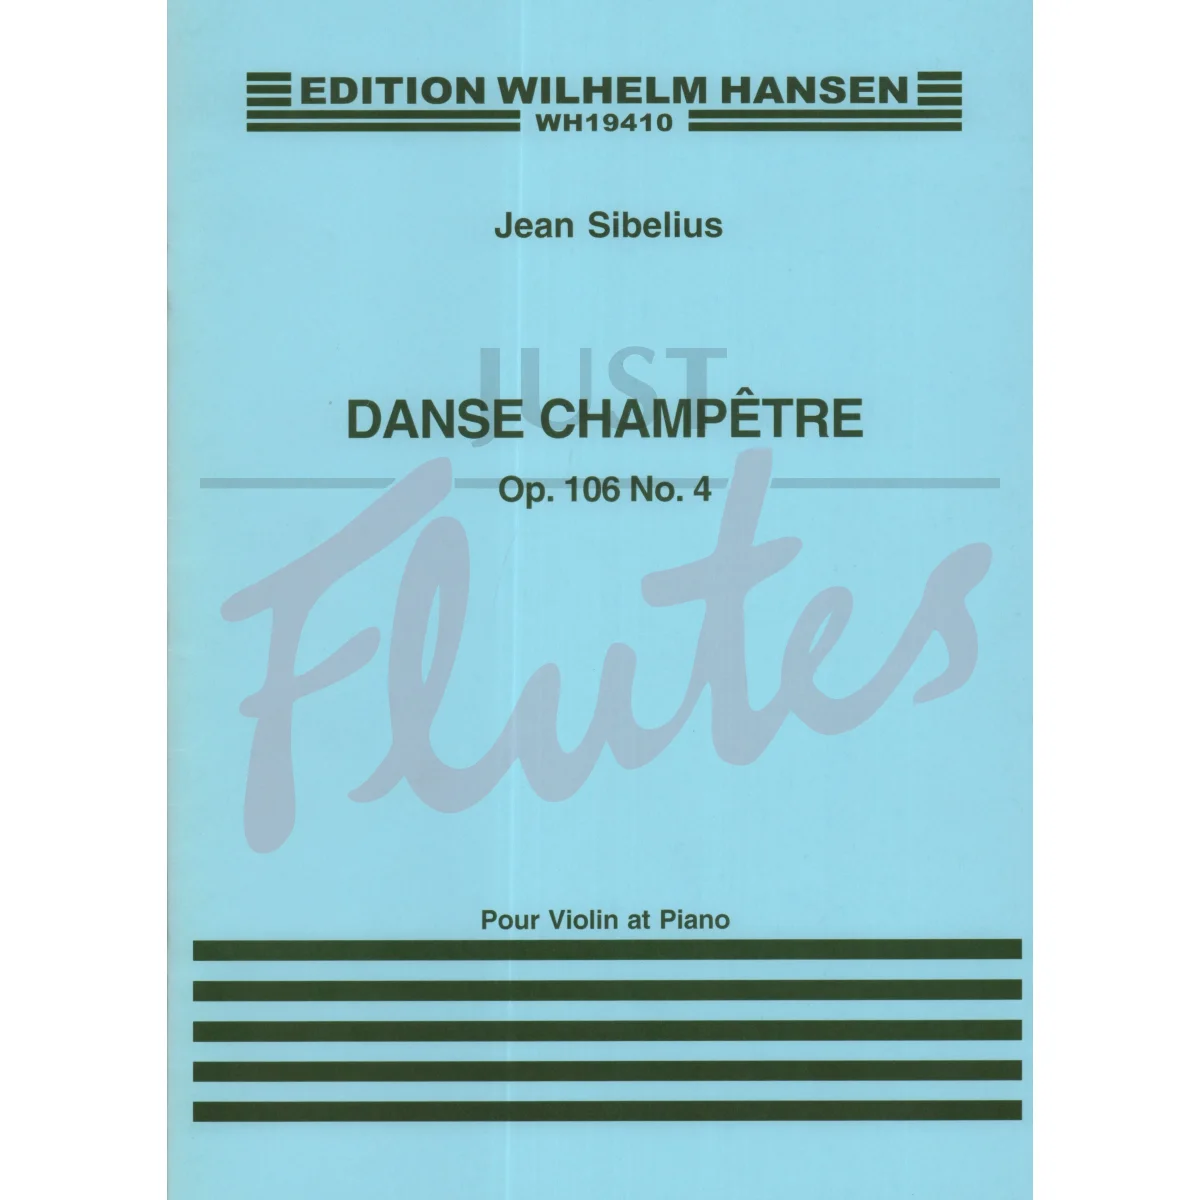 Danse Champetre for Violin and Piano